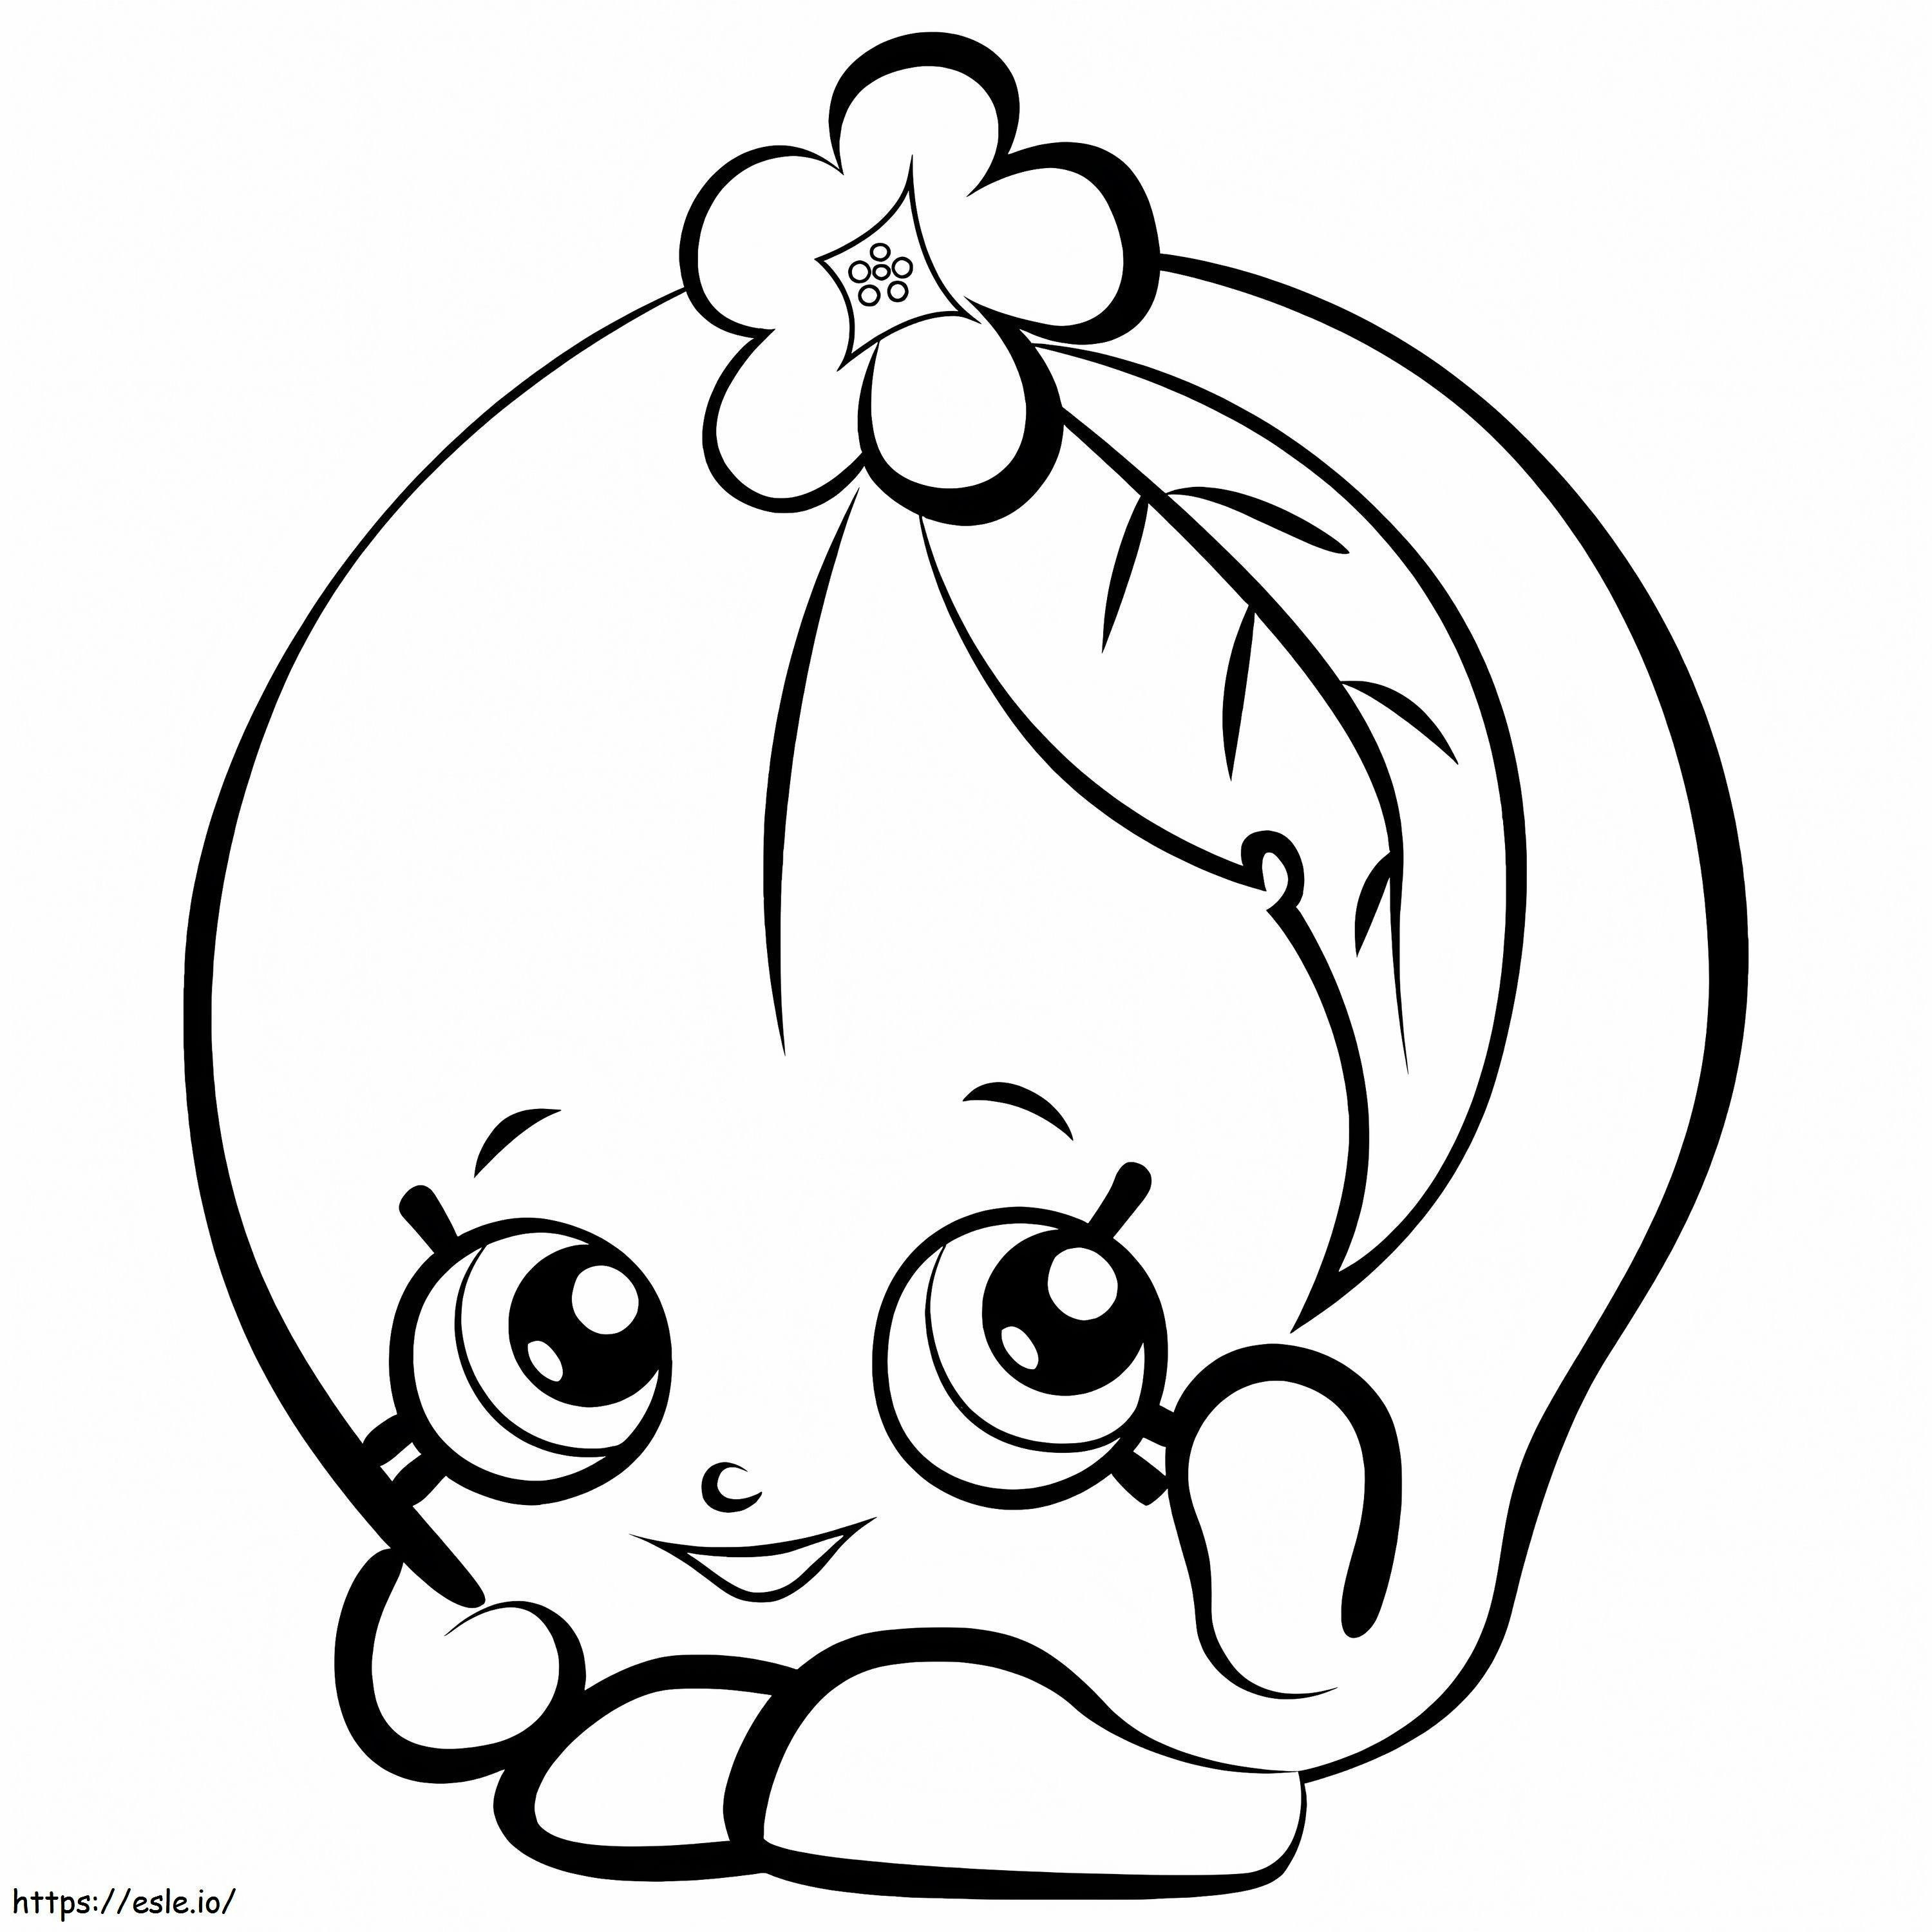 Peachy Shopkins coloring page